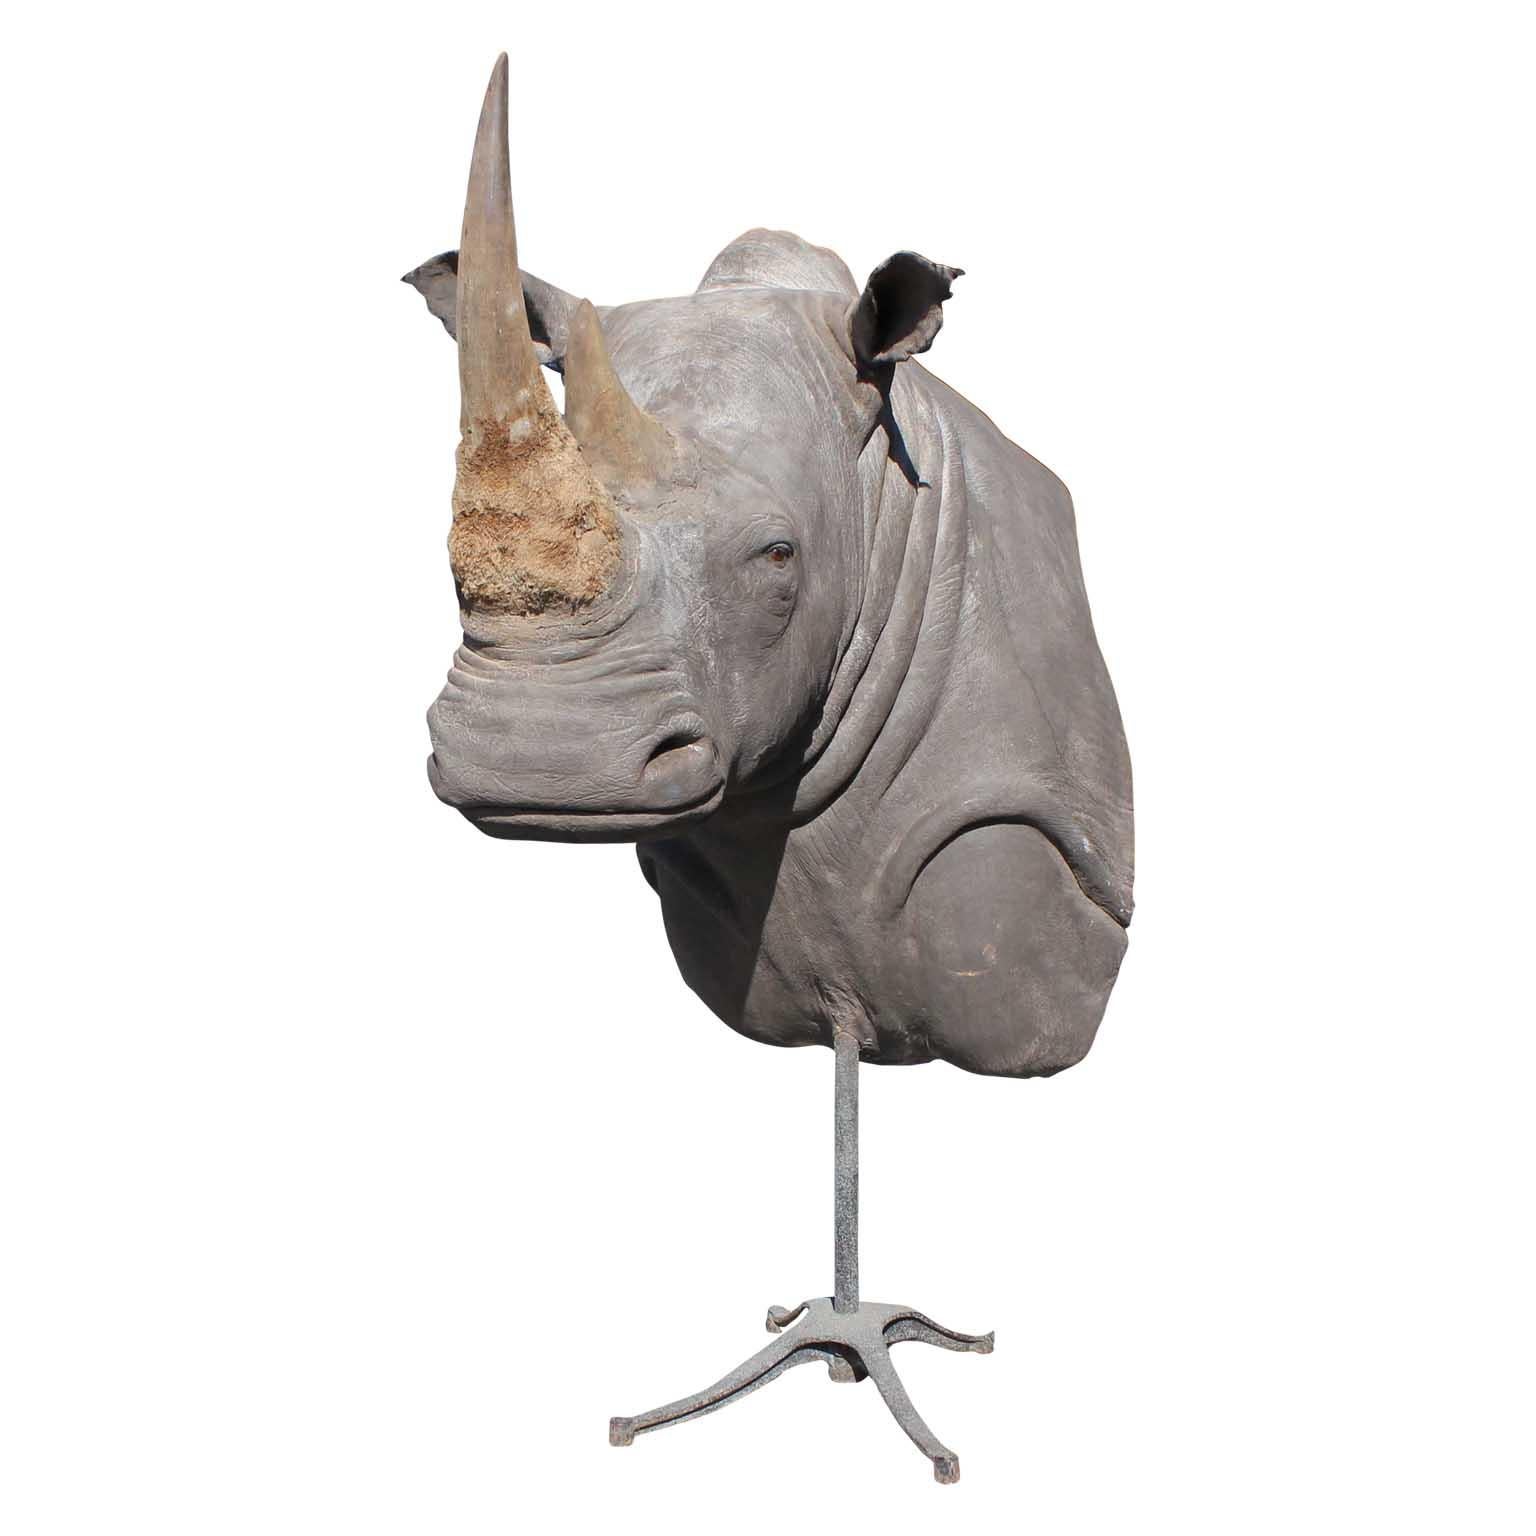 Spectacular and monumental authentic taxidermy mounted white rhino bust. Resale to Texas residents only.